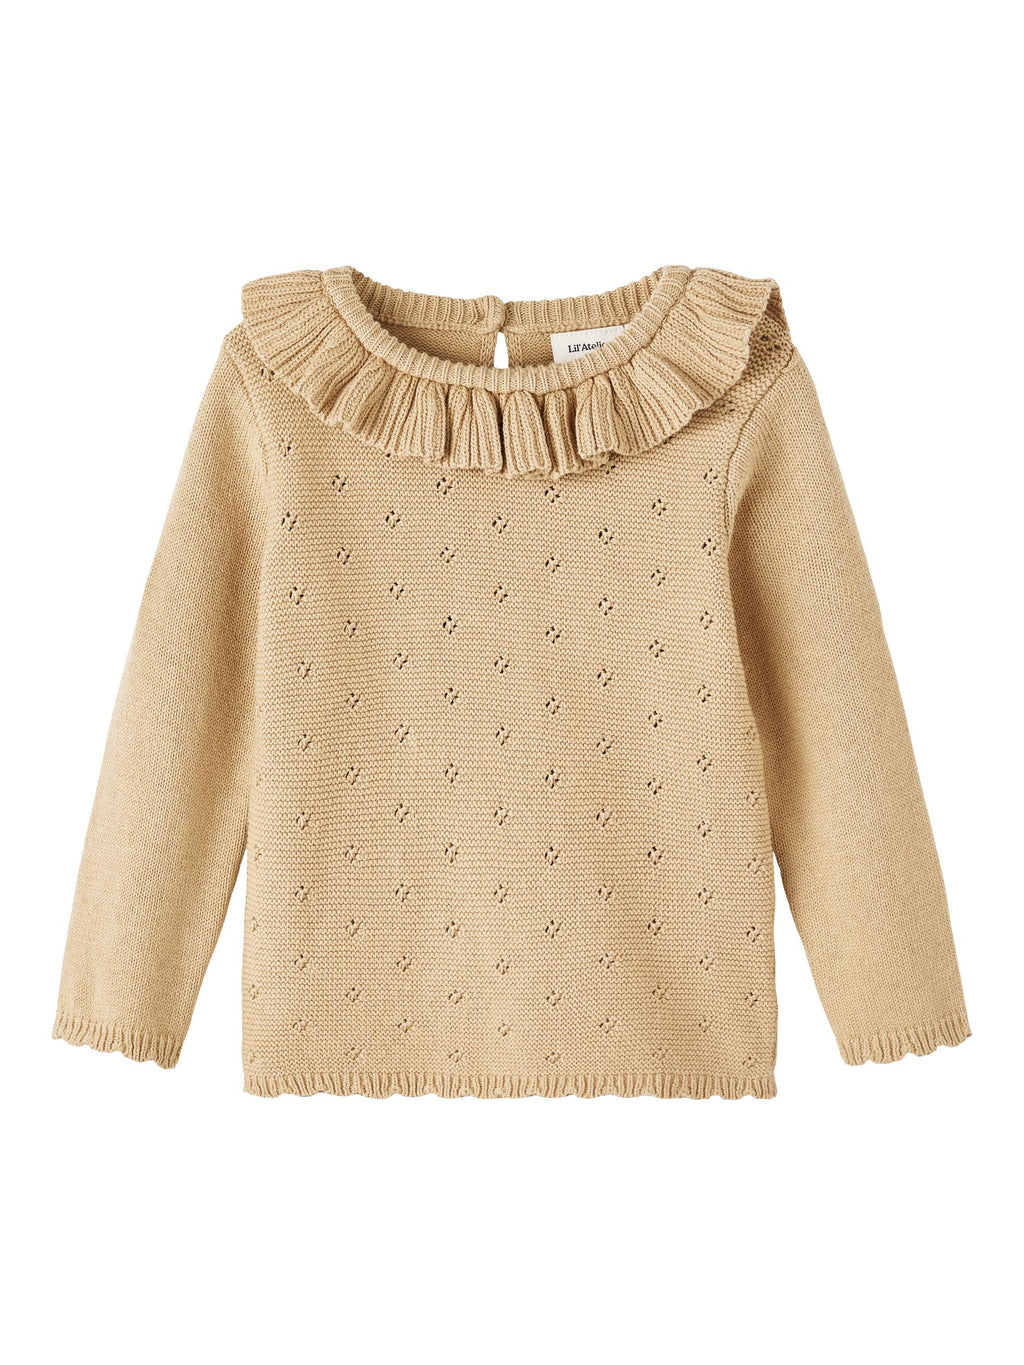 Lil Atelier Laguno Knit Sweater Curds & Whey